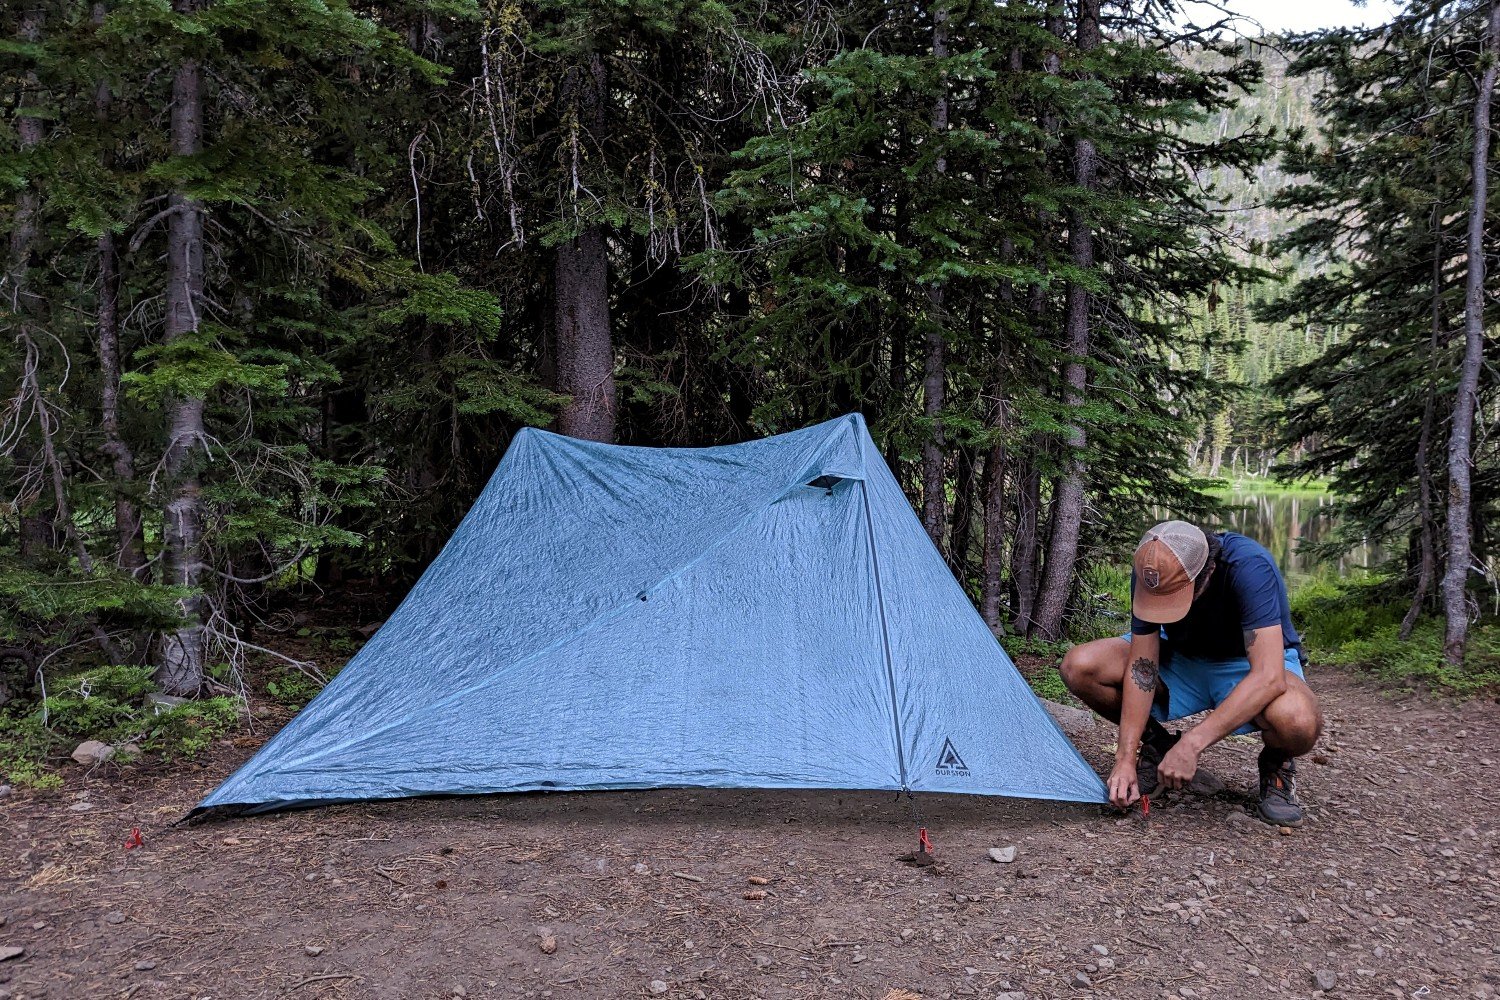 A hiker staking down the Durston X-Mid 2 Pro tent in a campsite surrounded by pine trees